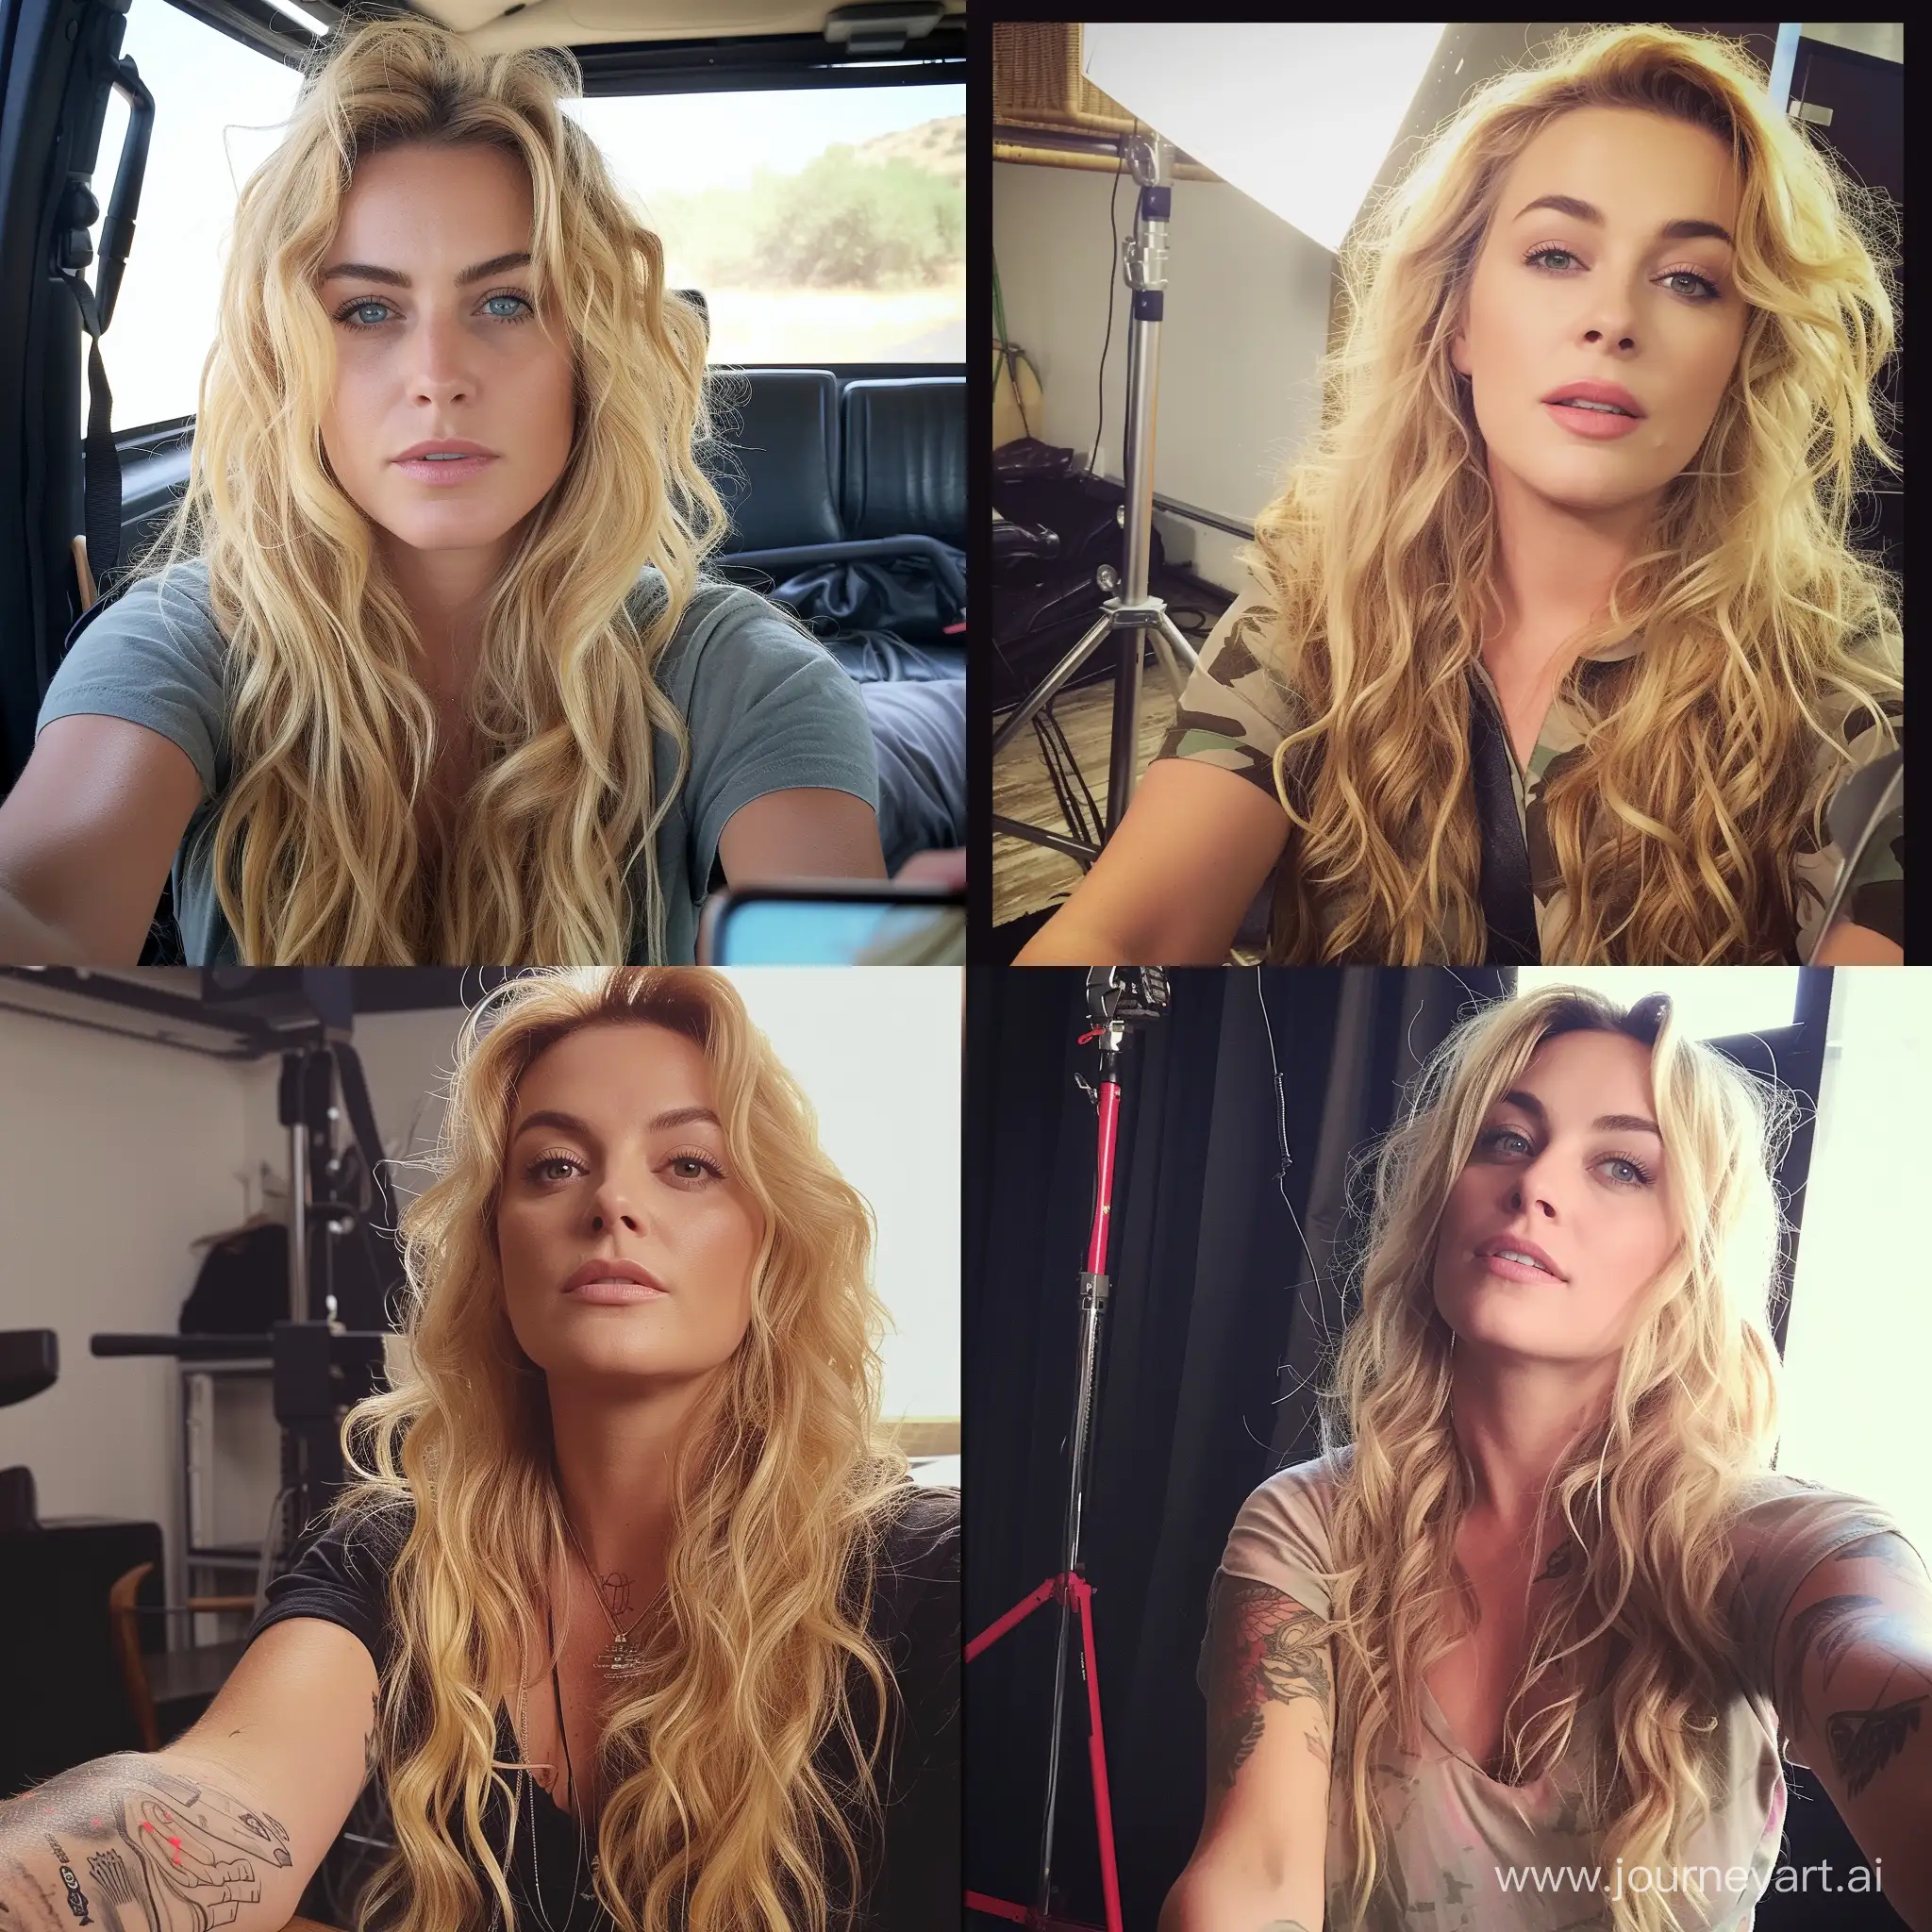 Lindsay-Lohan-Taking-a-Selfie-Playful-Actress-Captures-Candid-Moment-in-Sitcom-Scene